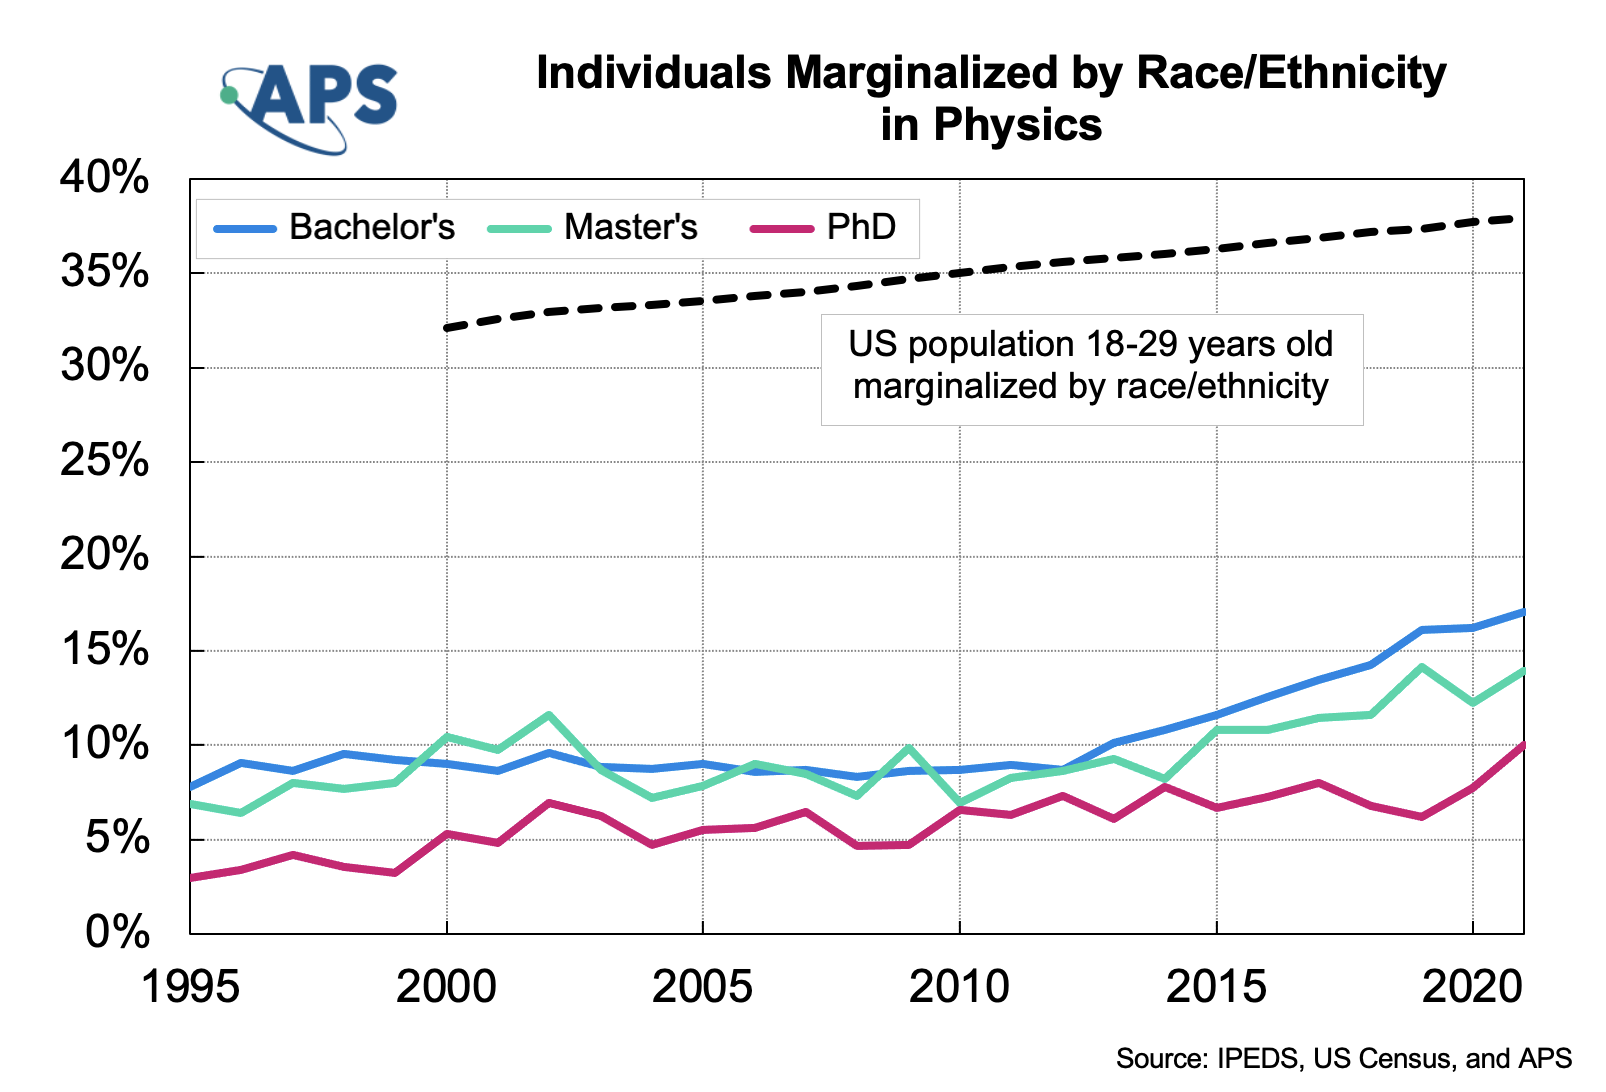 Physics Degrees Earned by Individuals Marginalized by Race/Ethnicity